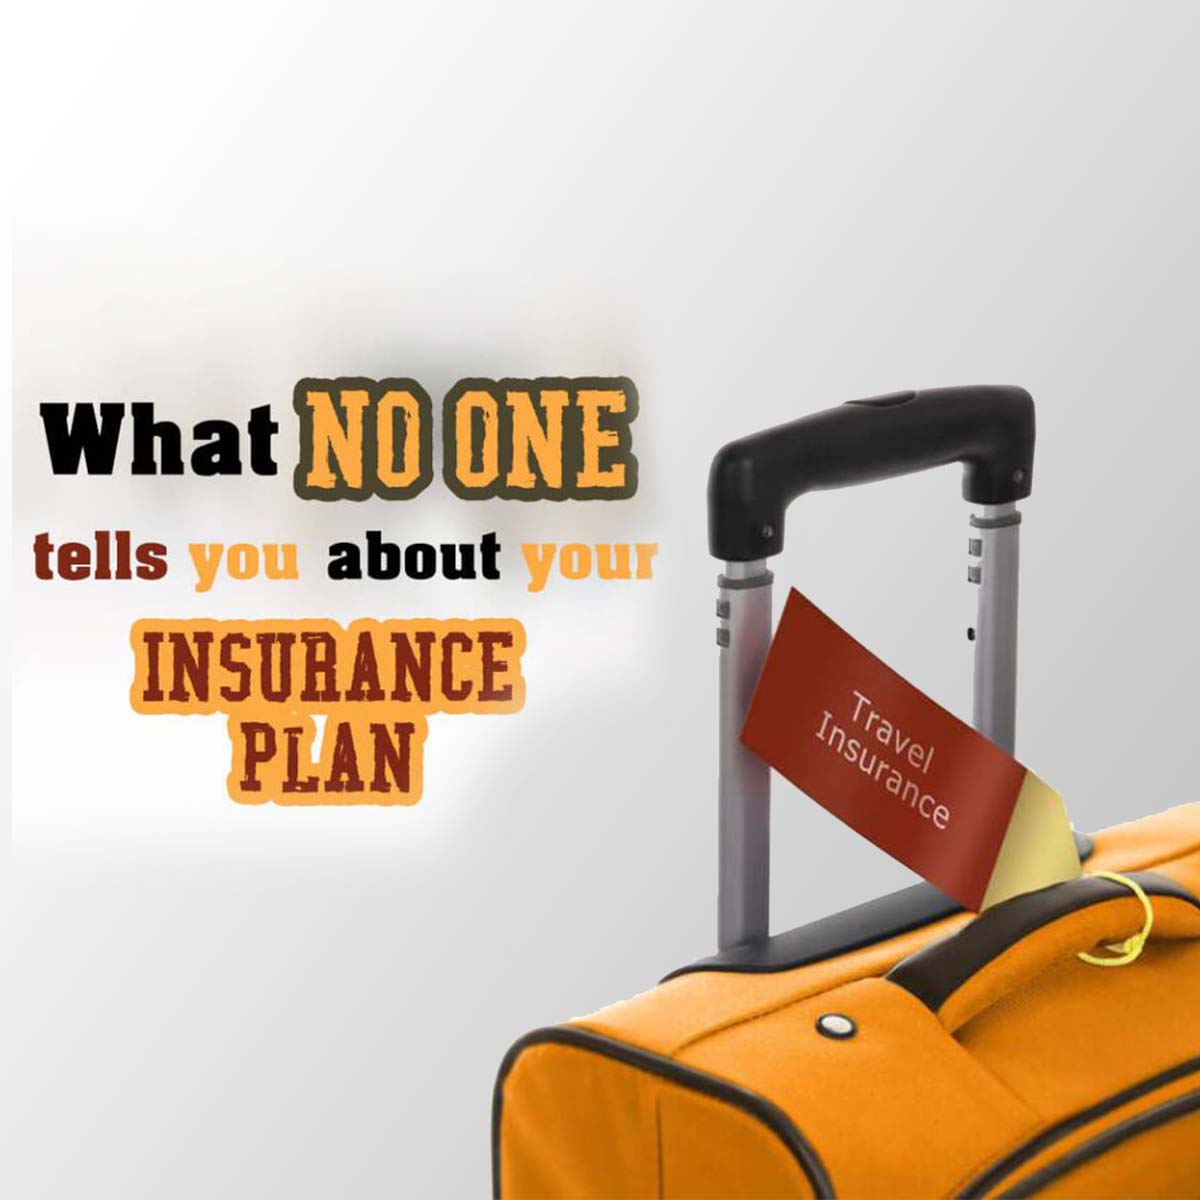 What is not included in your Travel Insurance Policy?